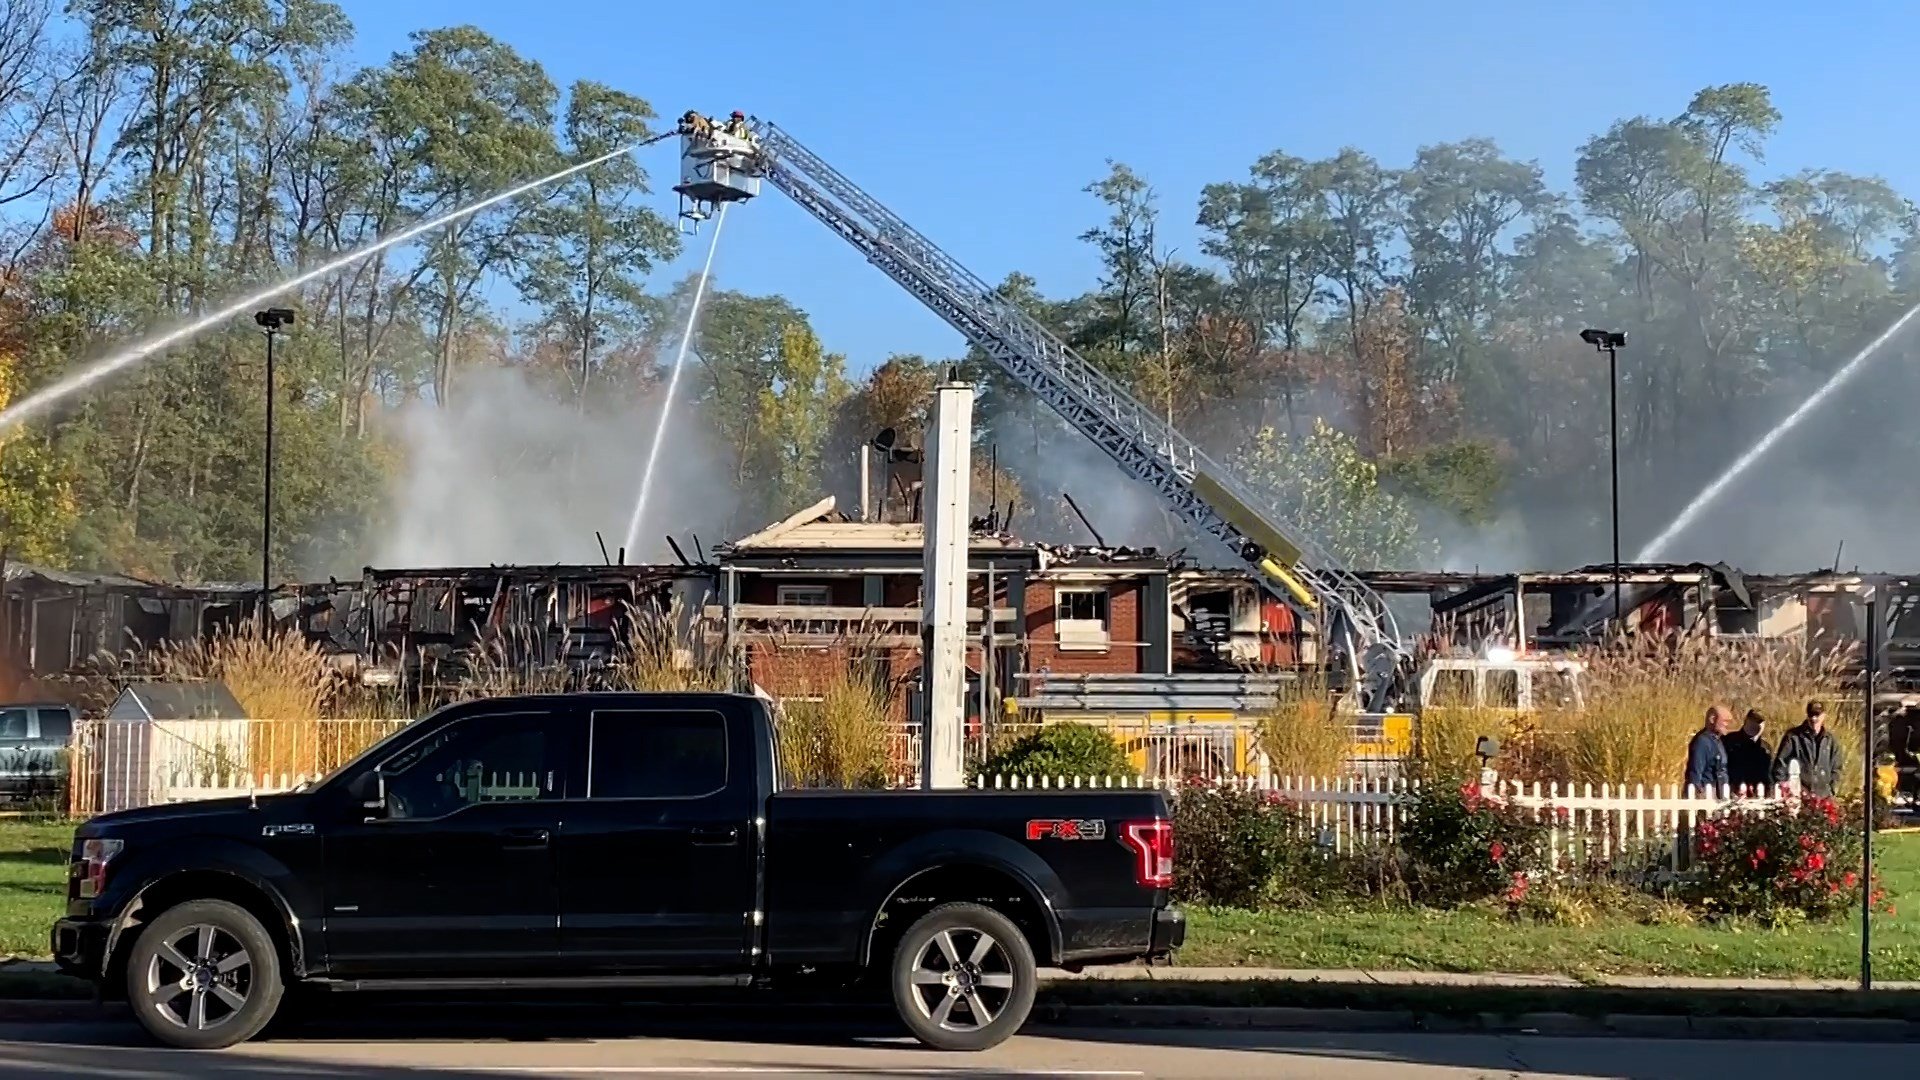 Crews Battle Early Morning Fire at Colony Motel in Chautauqua County